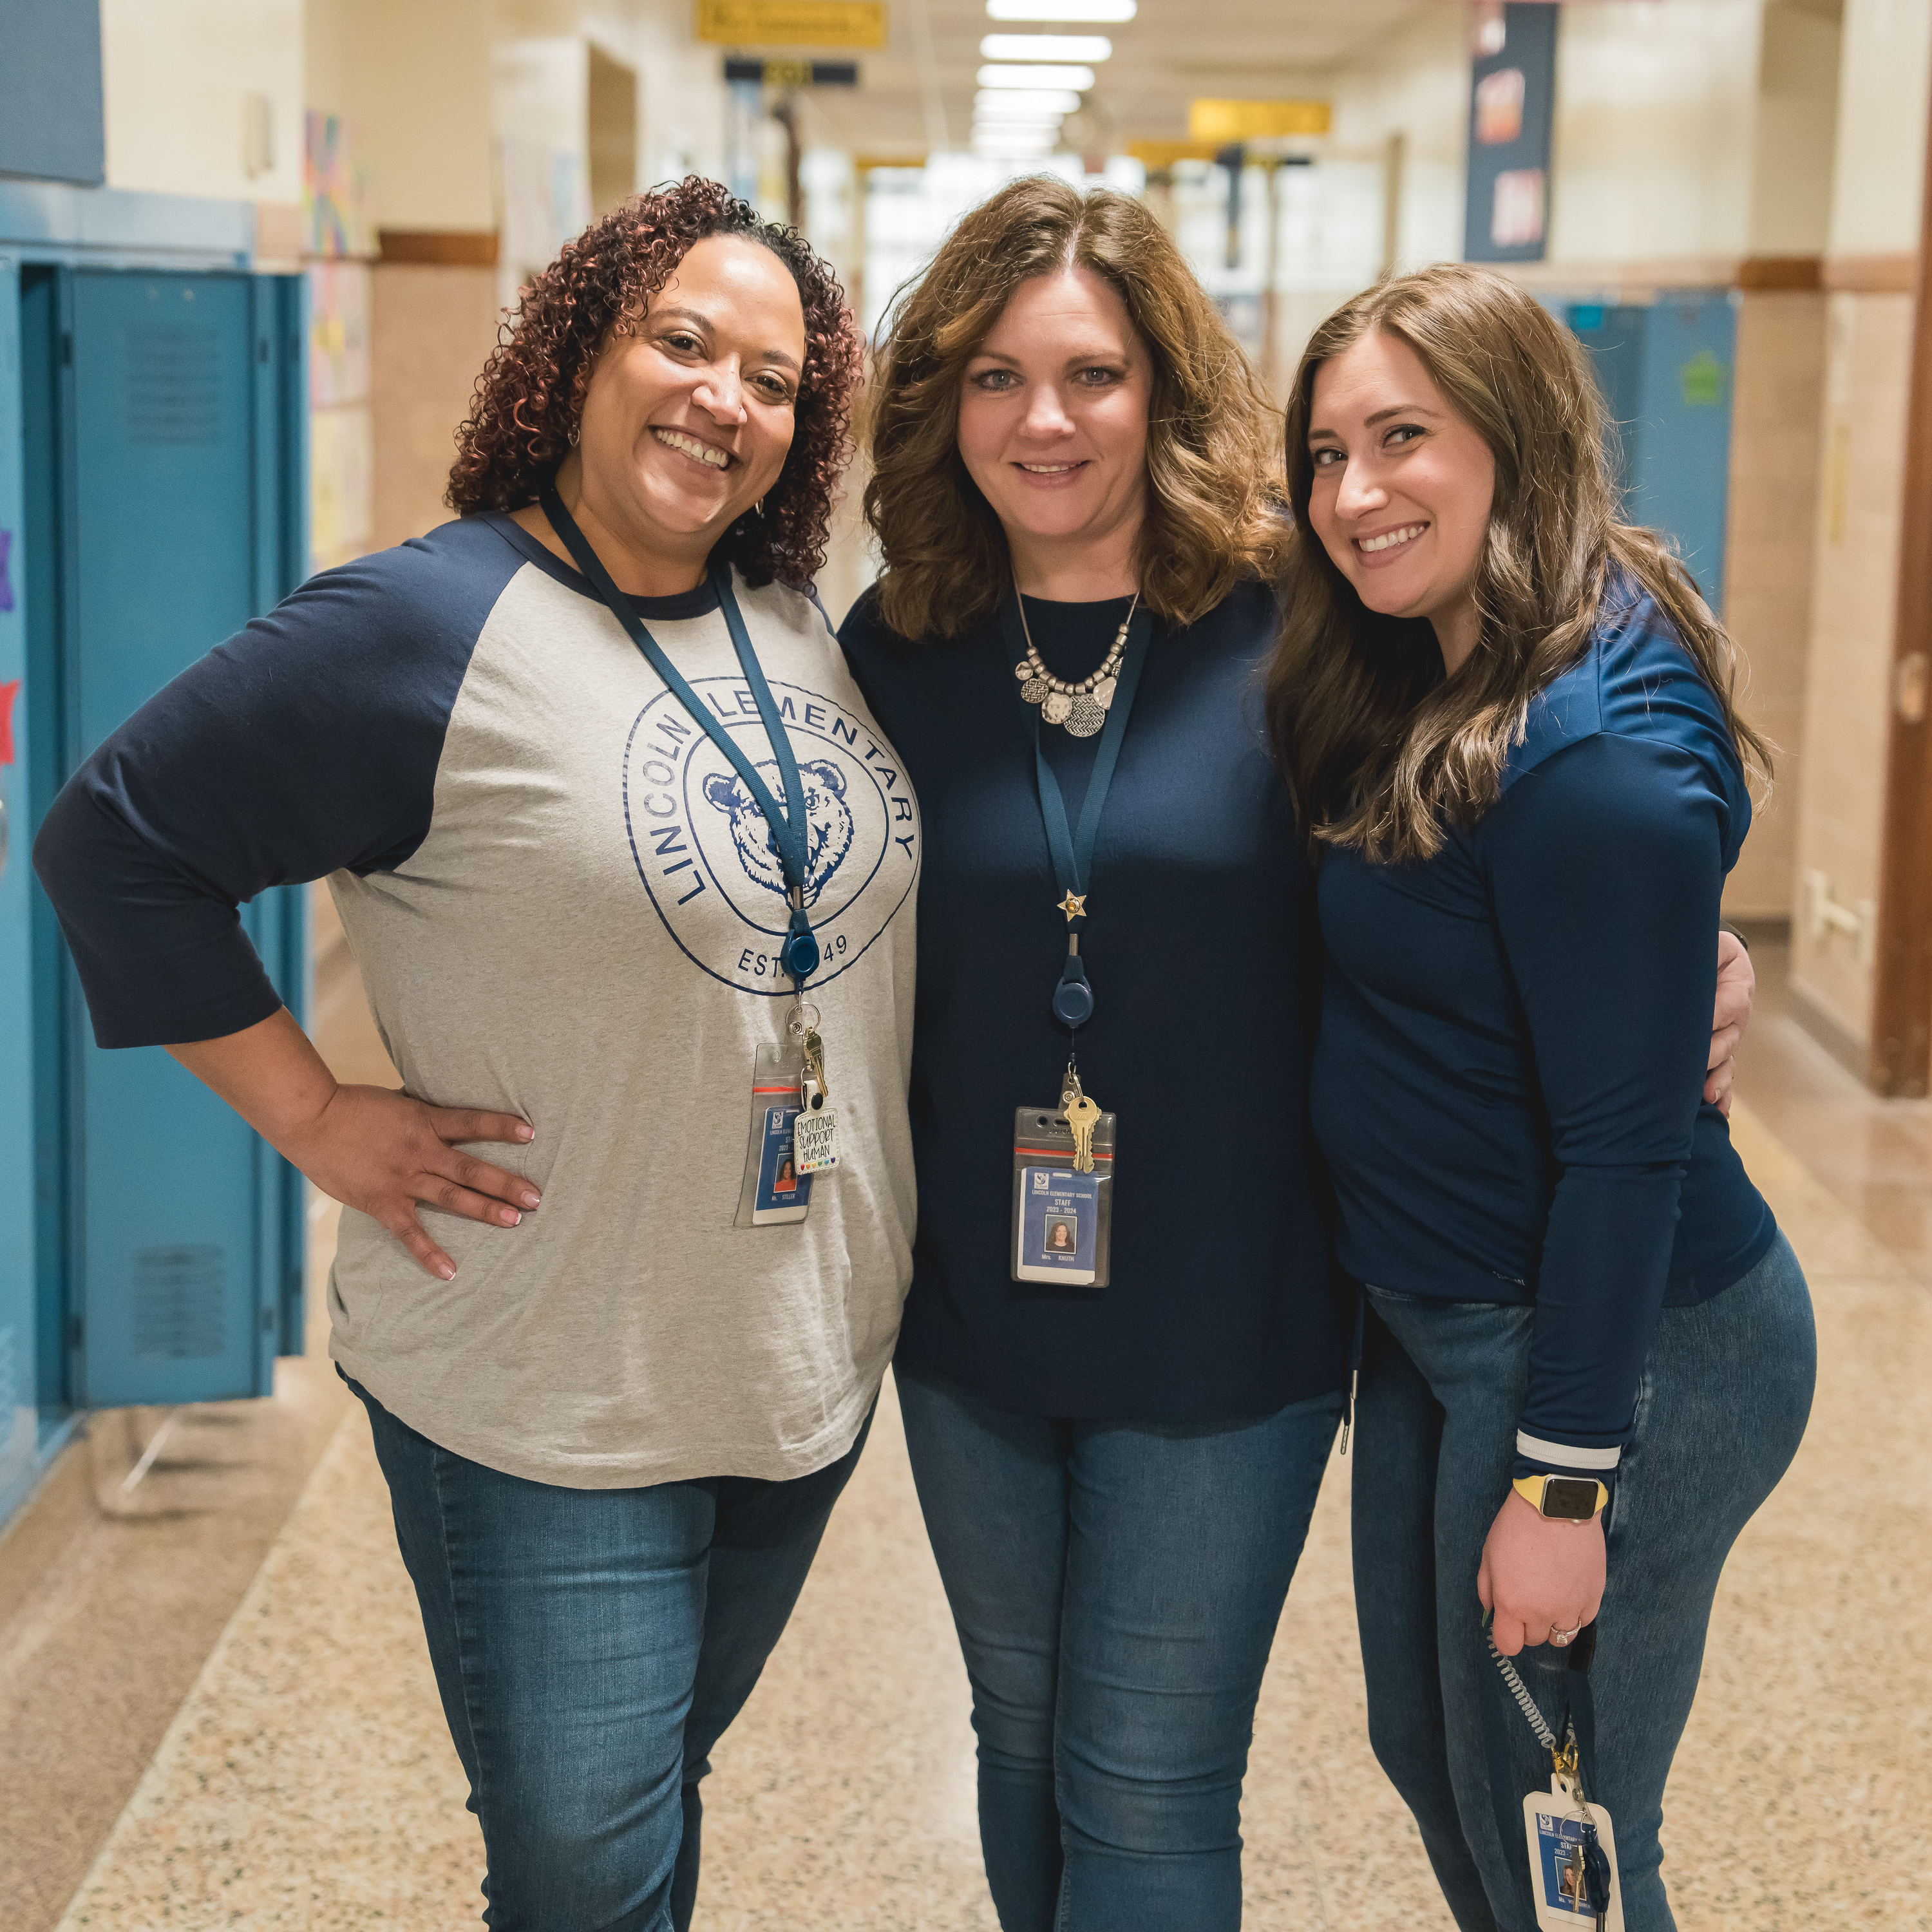 Lincoln elementary staff standing in hallway